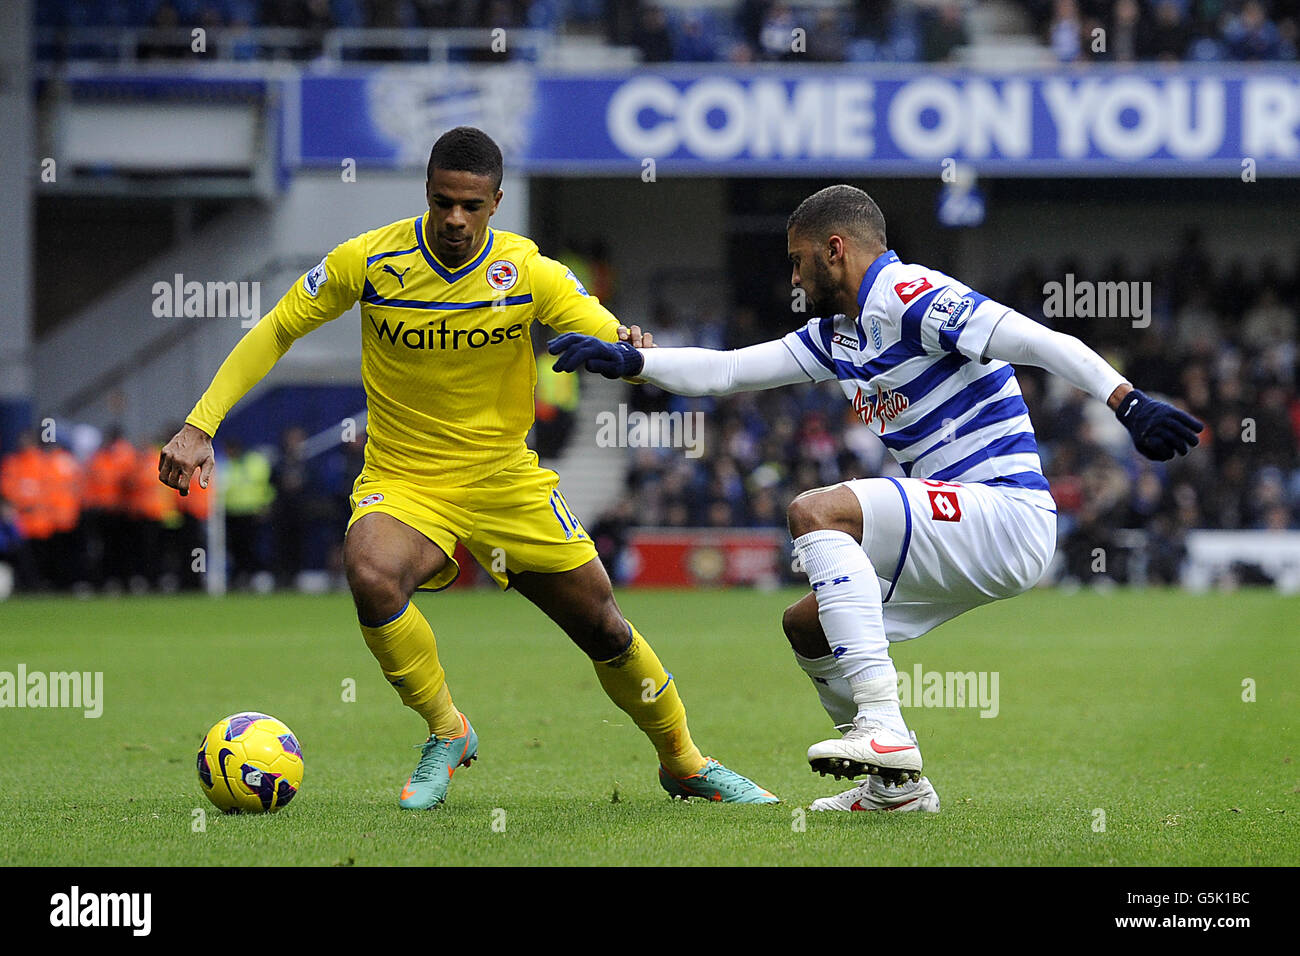 Soccer - Barclays Premier League - Queens Park Rangers v Reading - Loftus Road. Reading's Garath McCleary (left) battles for the ball with Queens Park Rangers' Armand Traore (right) Stock Photo